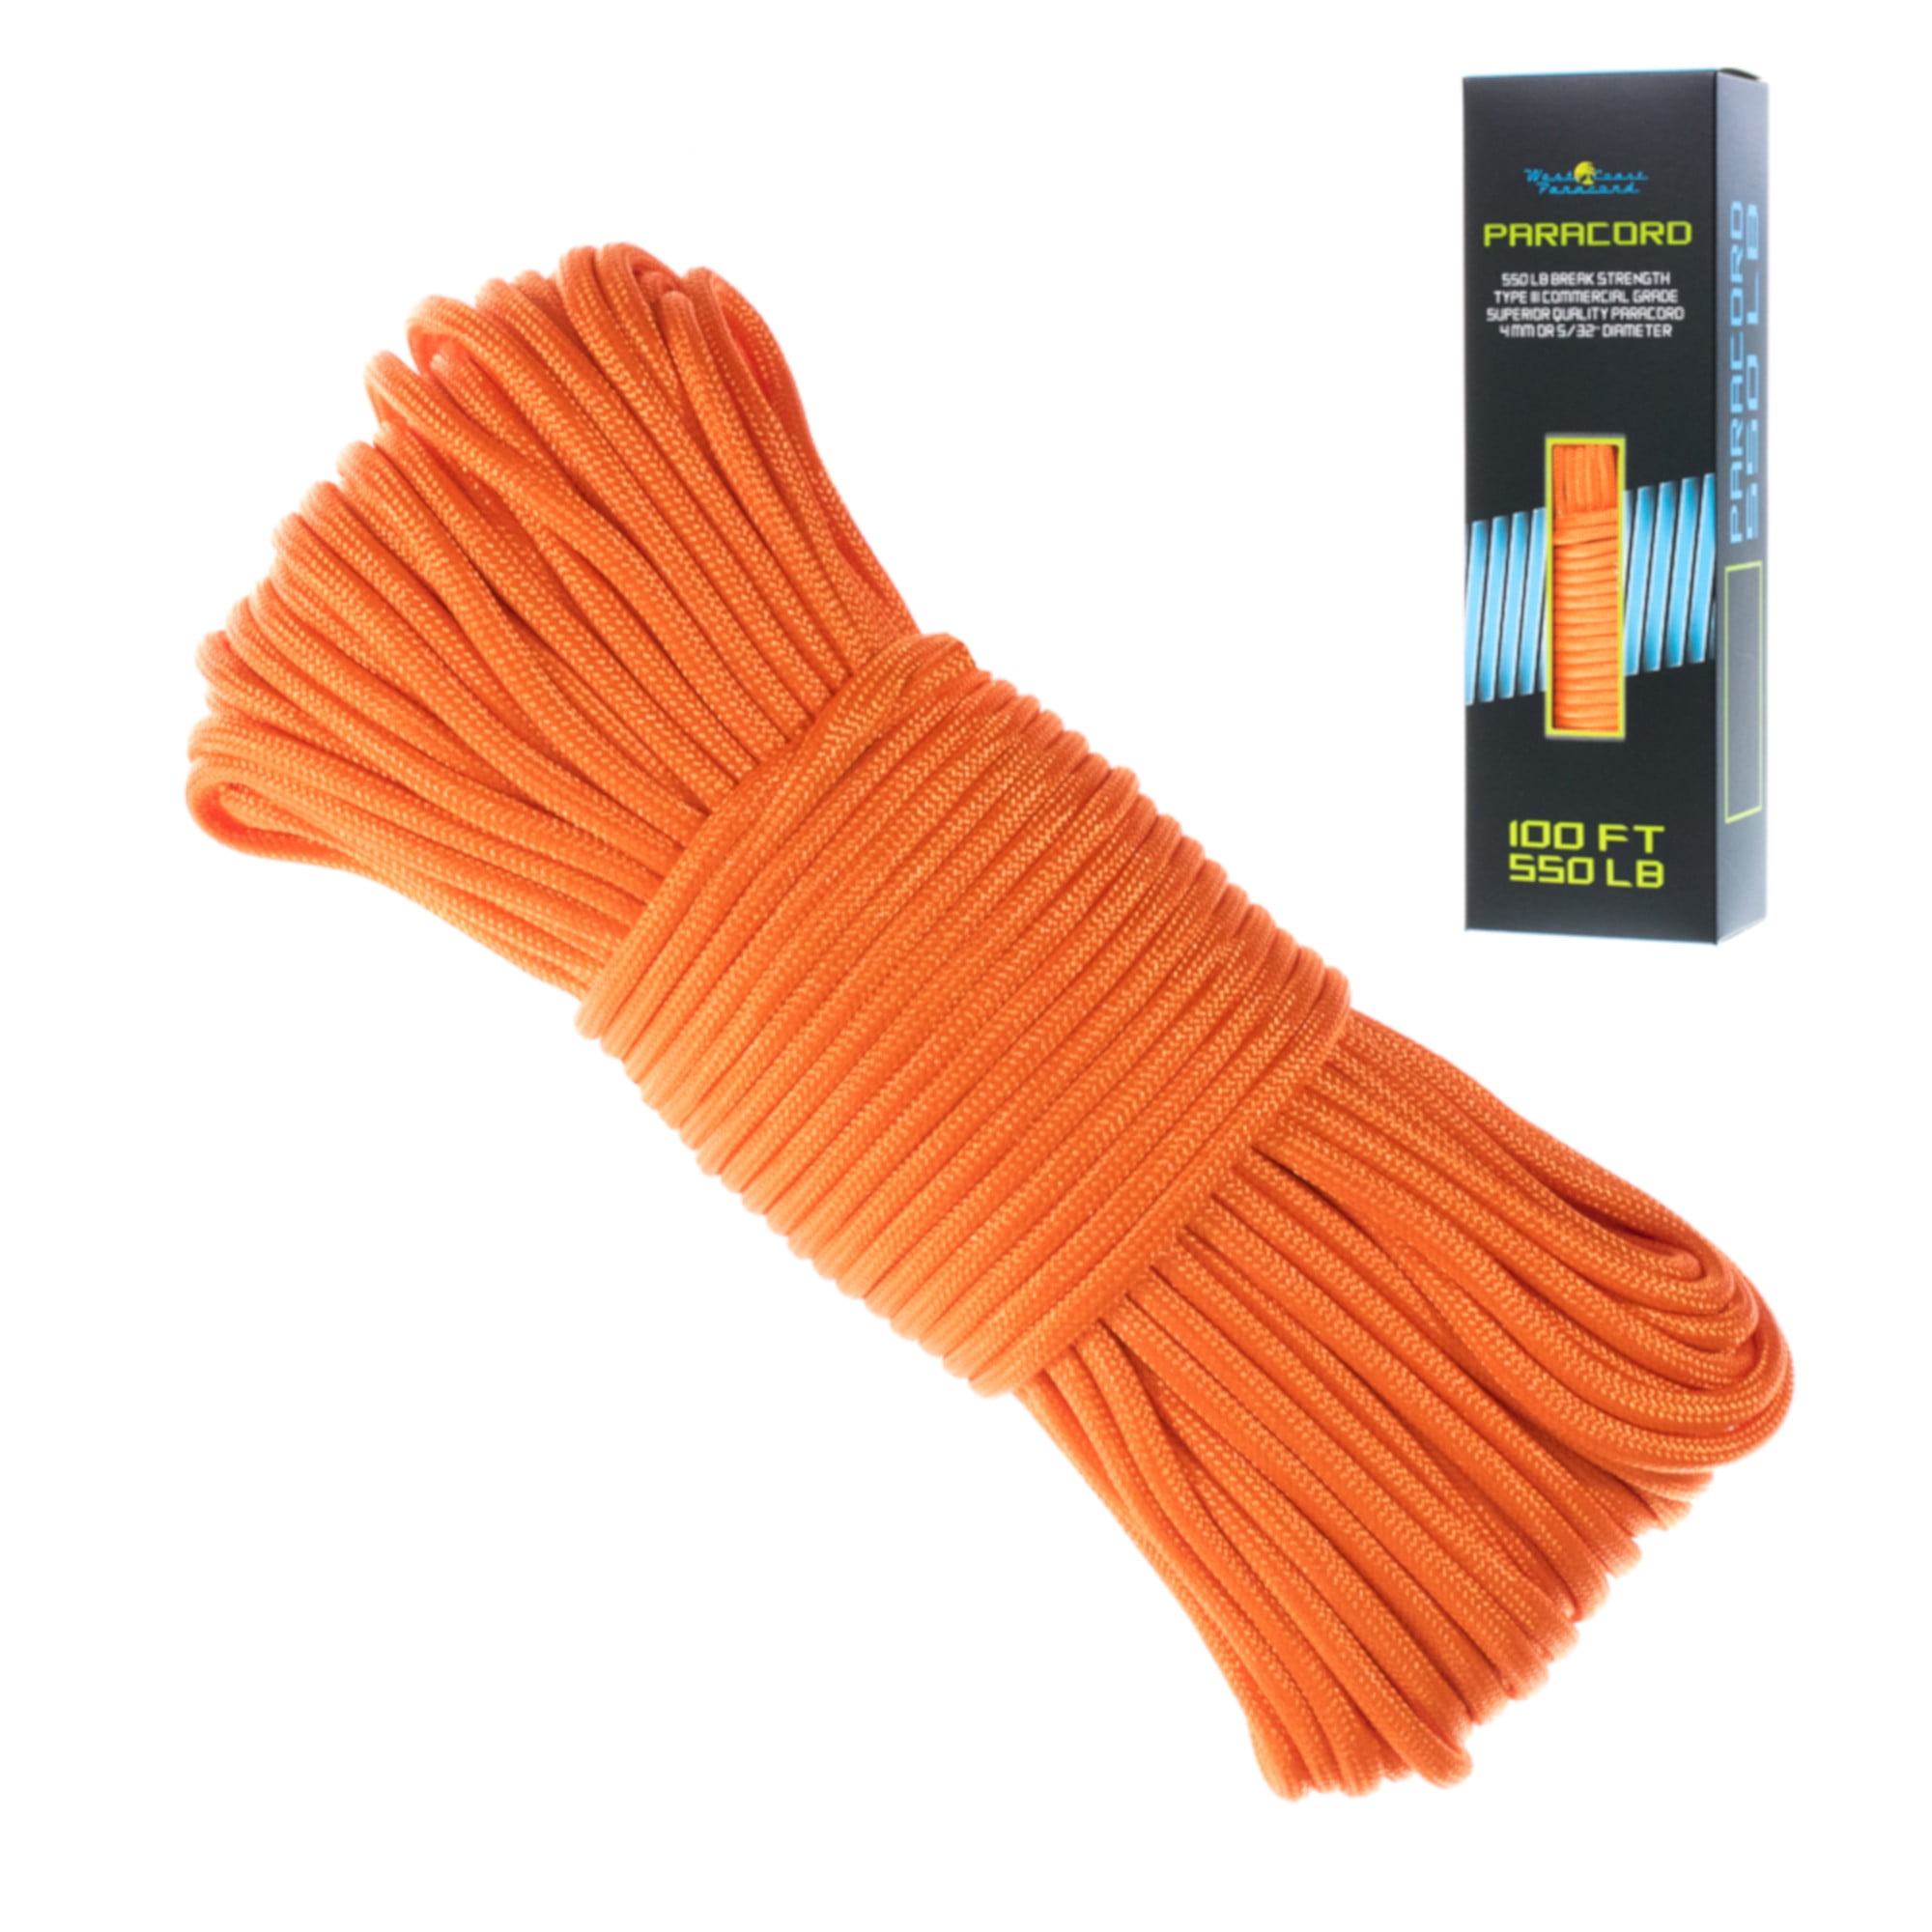 West Coast Paracord Boxed Paracord 550 Parachute Cord in 100 Foot Lengths  Many Color Options 